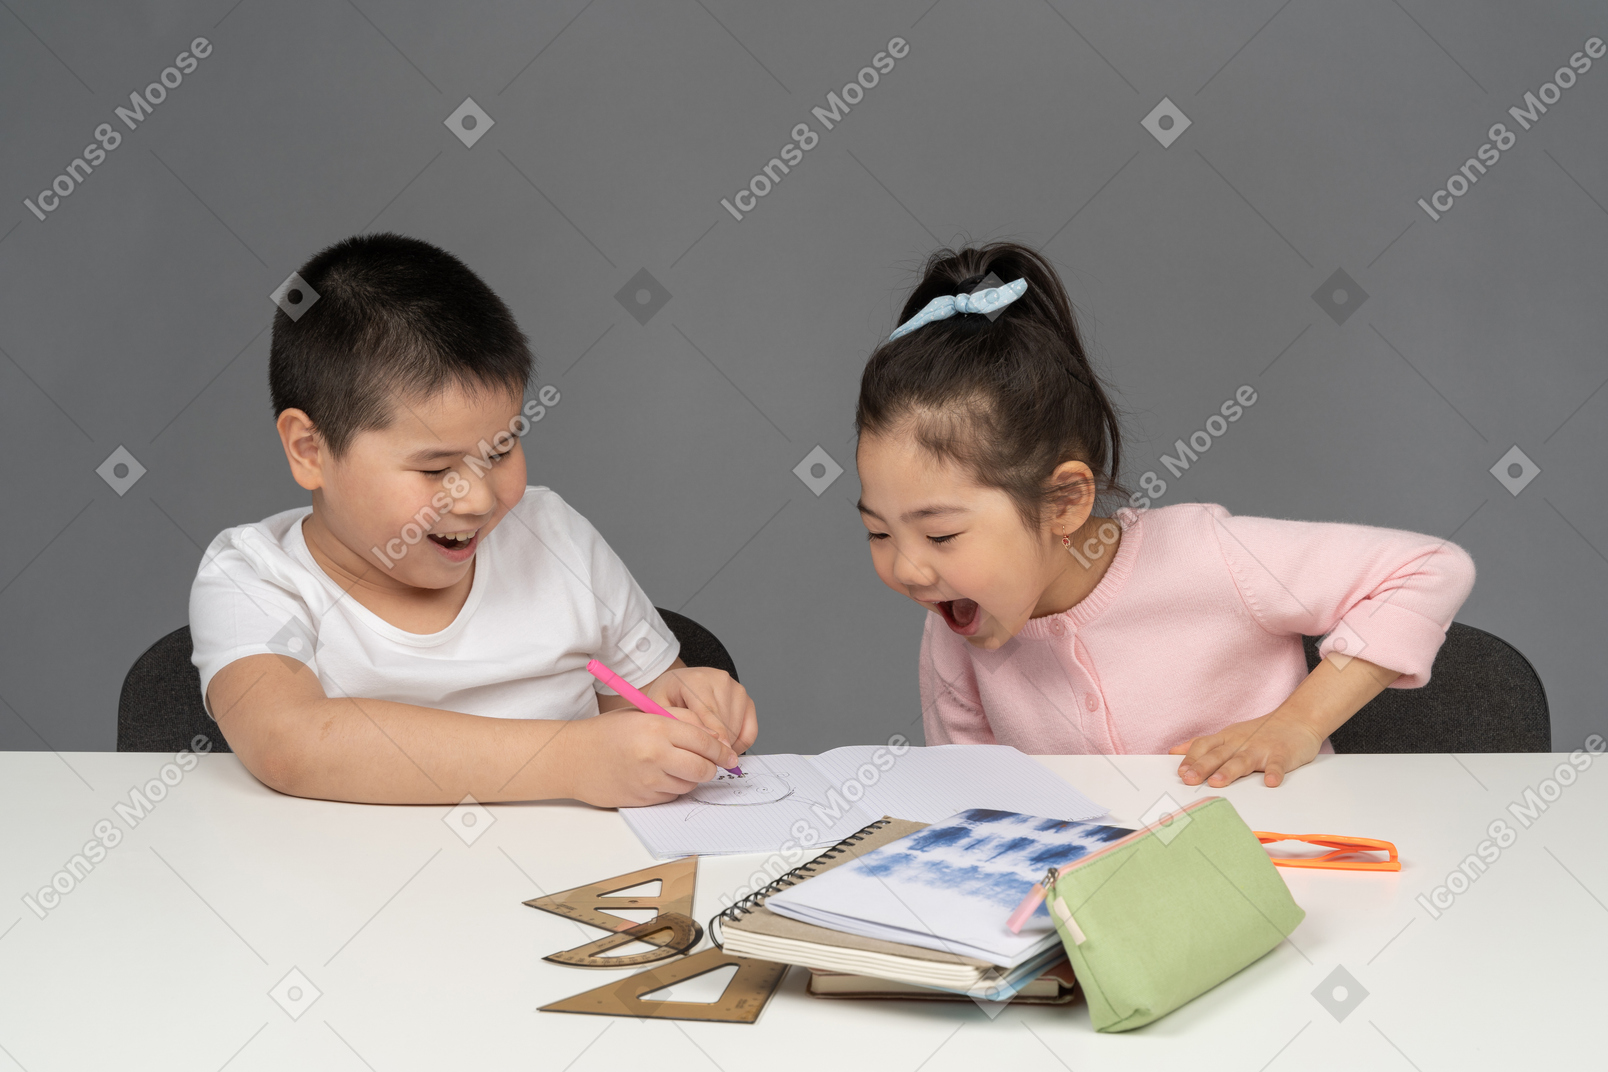 Boy and girl laughing while doing homework